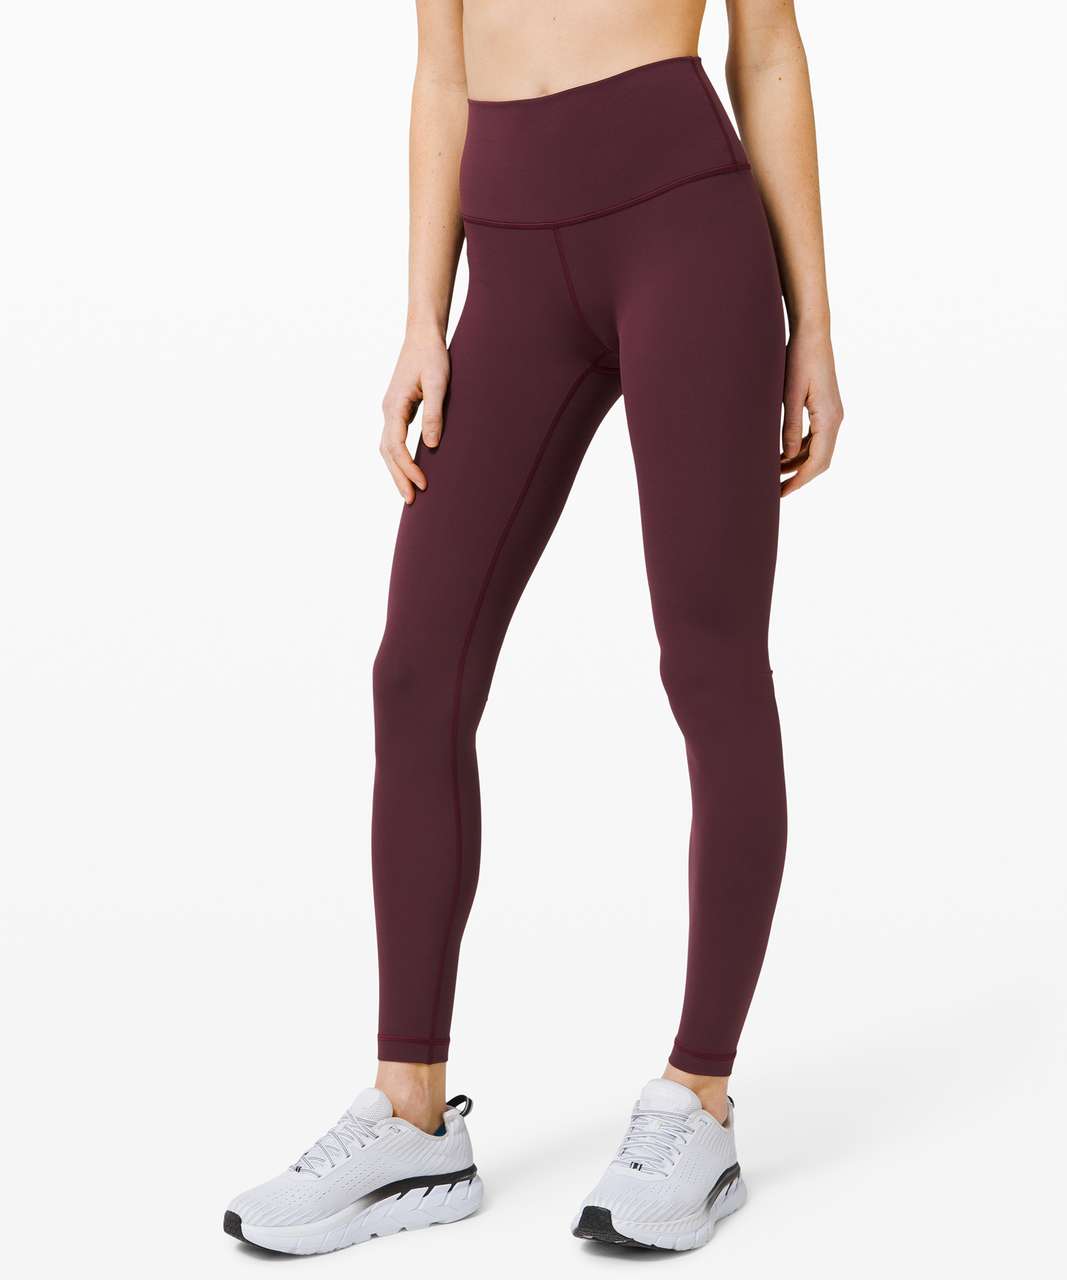 Lululemon Wunder Under High-Rise Tight 28" *Full-On Luxtreme - Cassis (First Release)